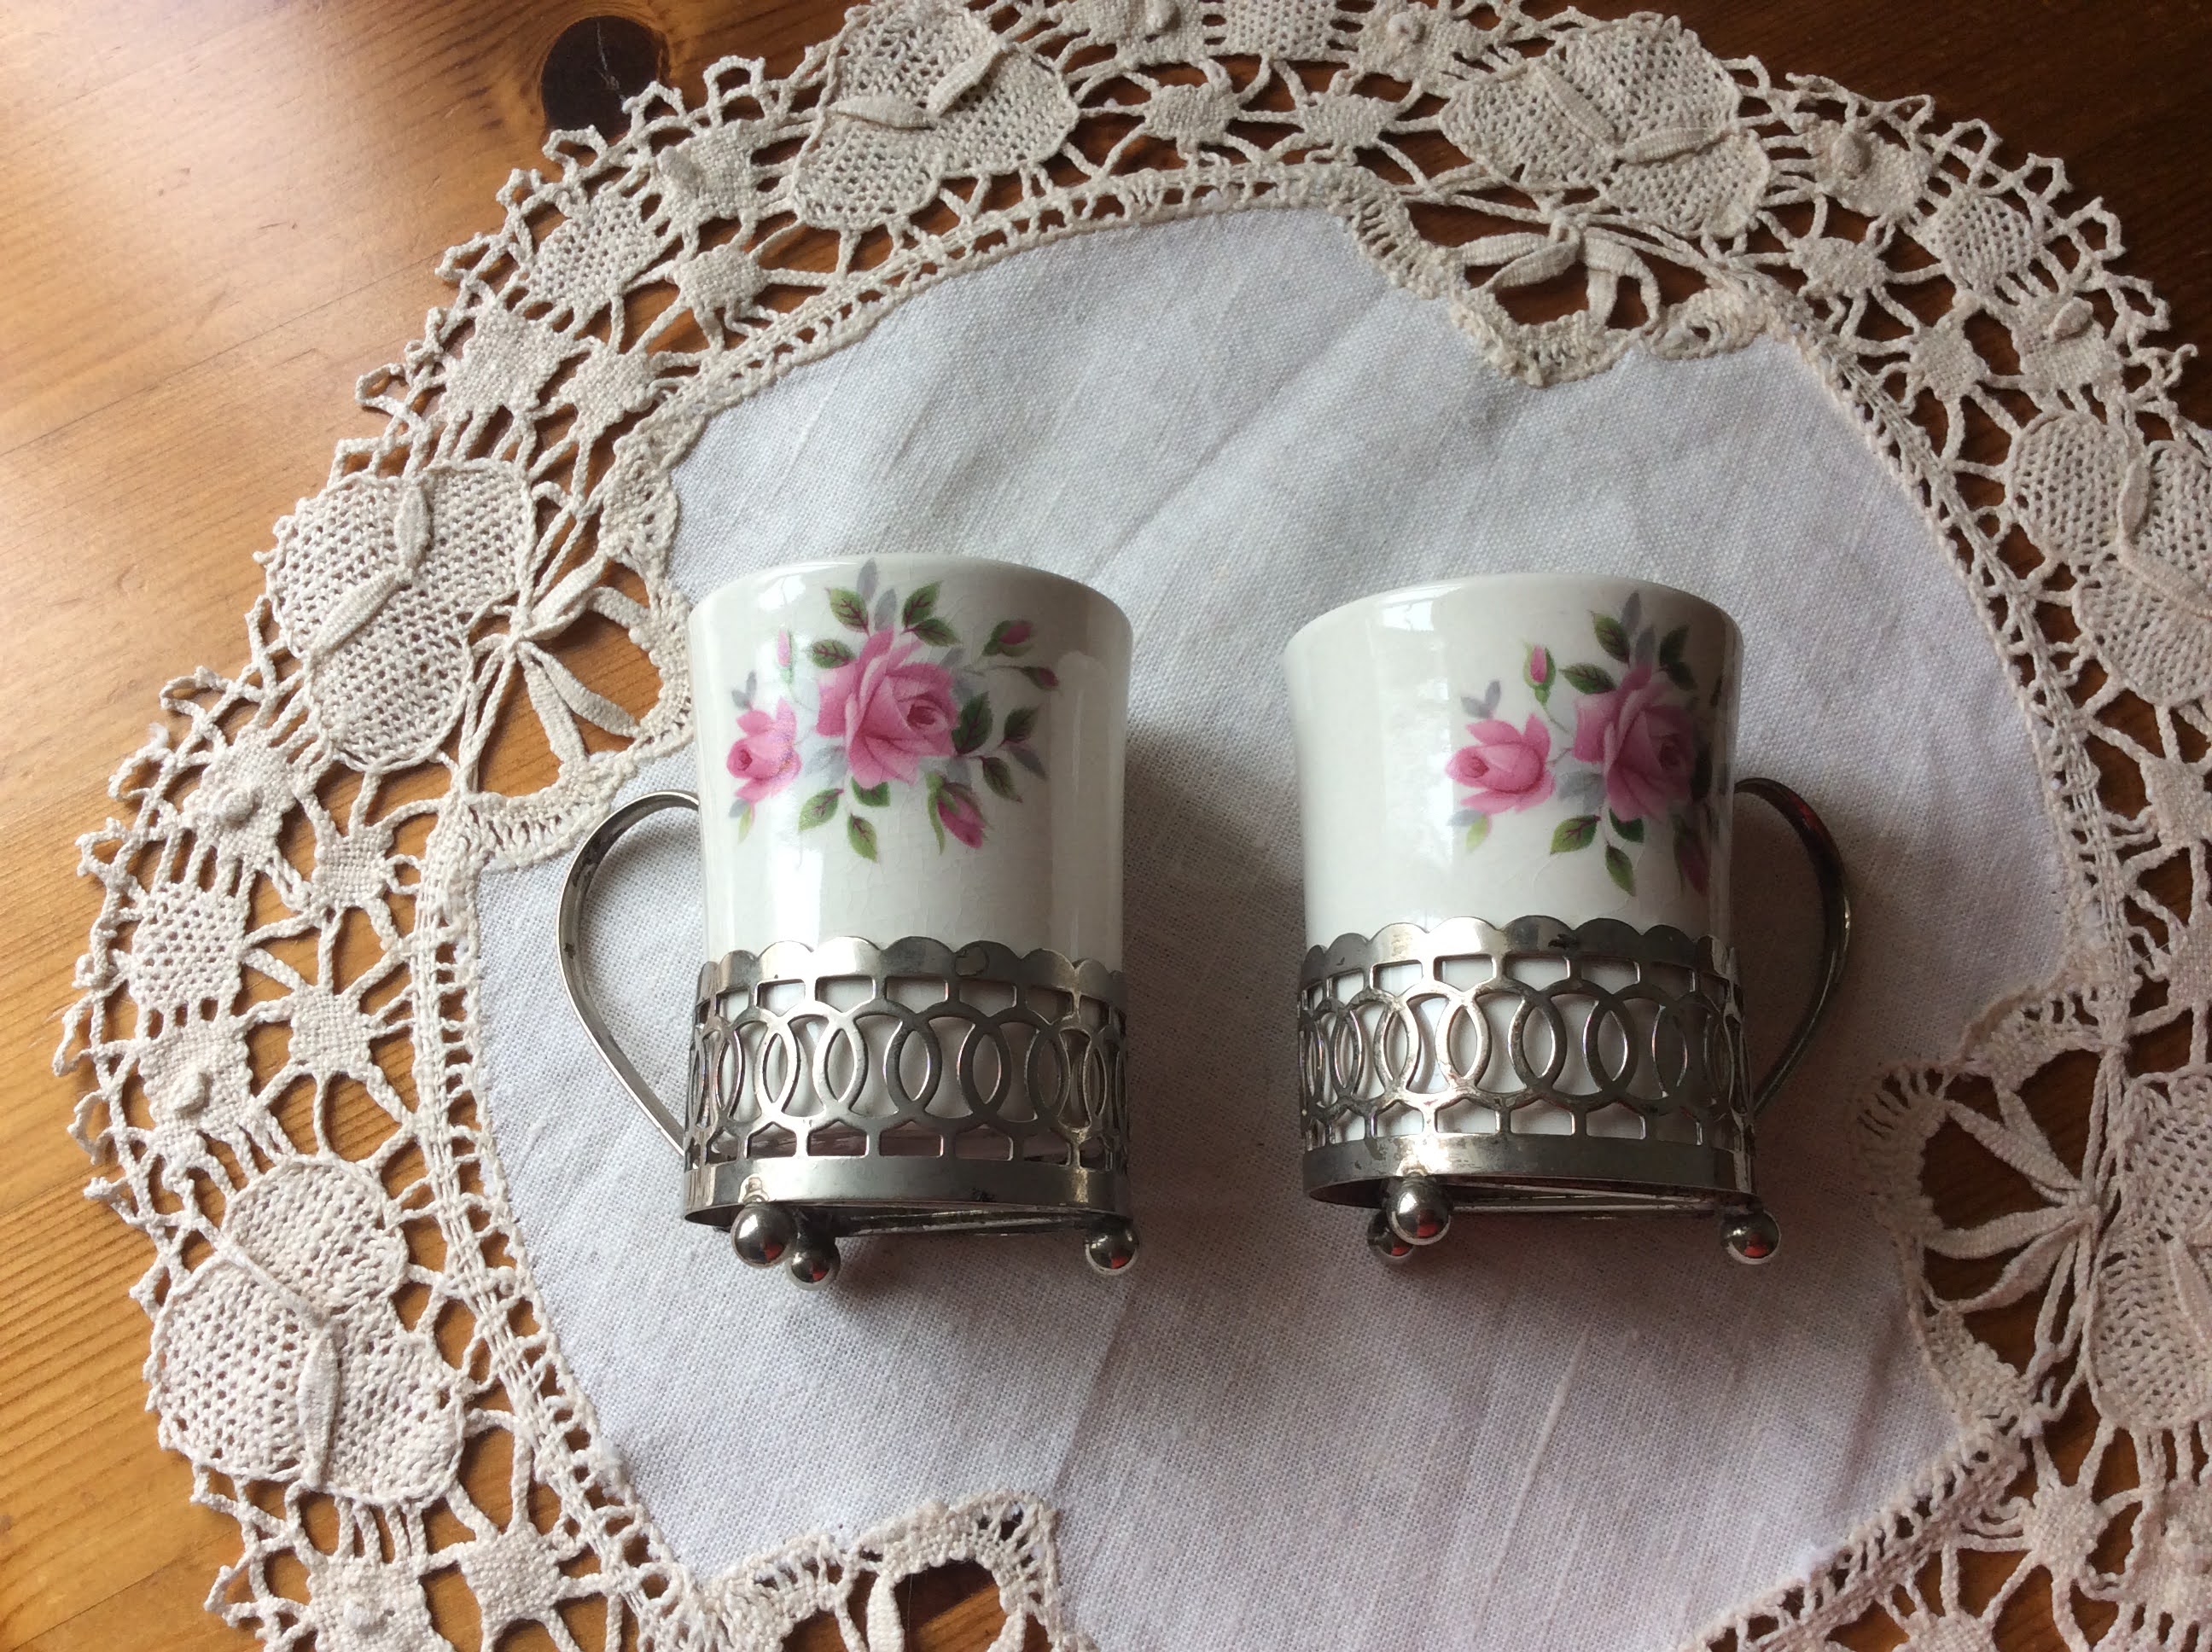 Vintage Coffee Cans - pretty roses